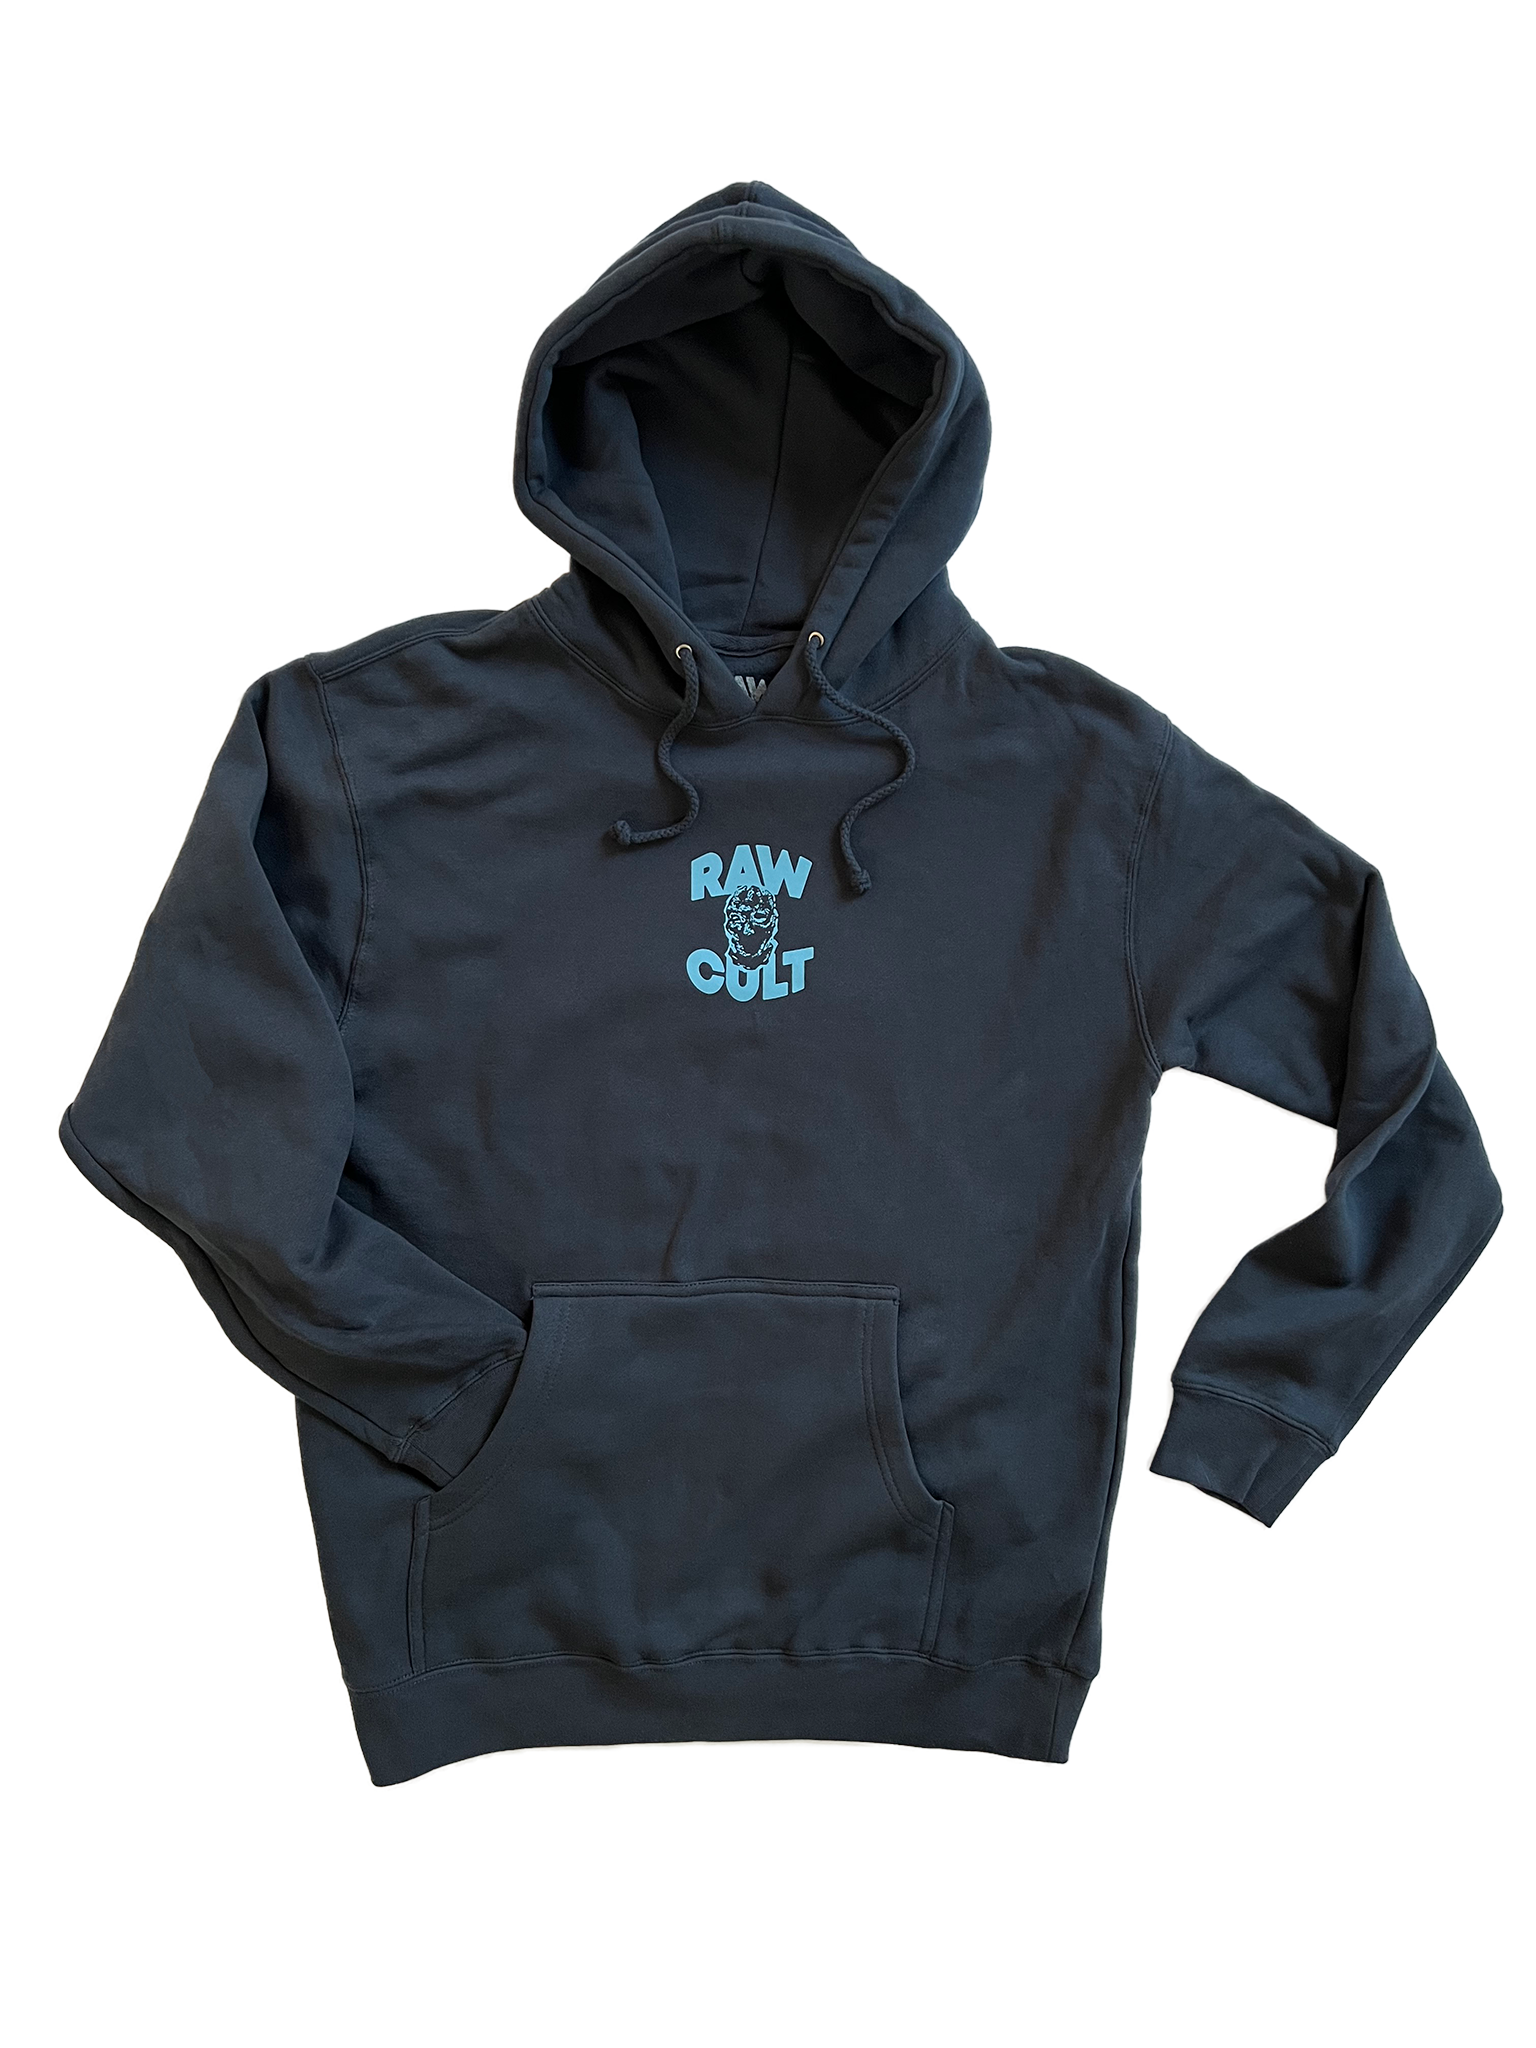 RAW CULT  Mask CULT Hoodie - Baby Blue on Slate Blue